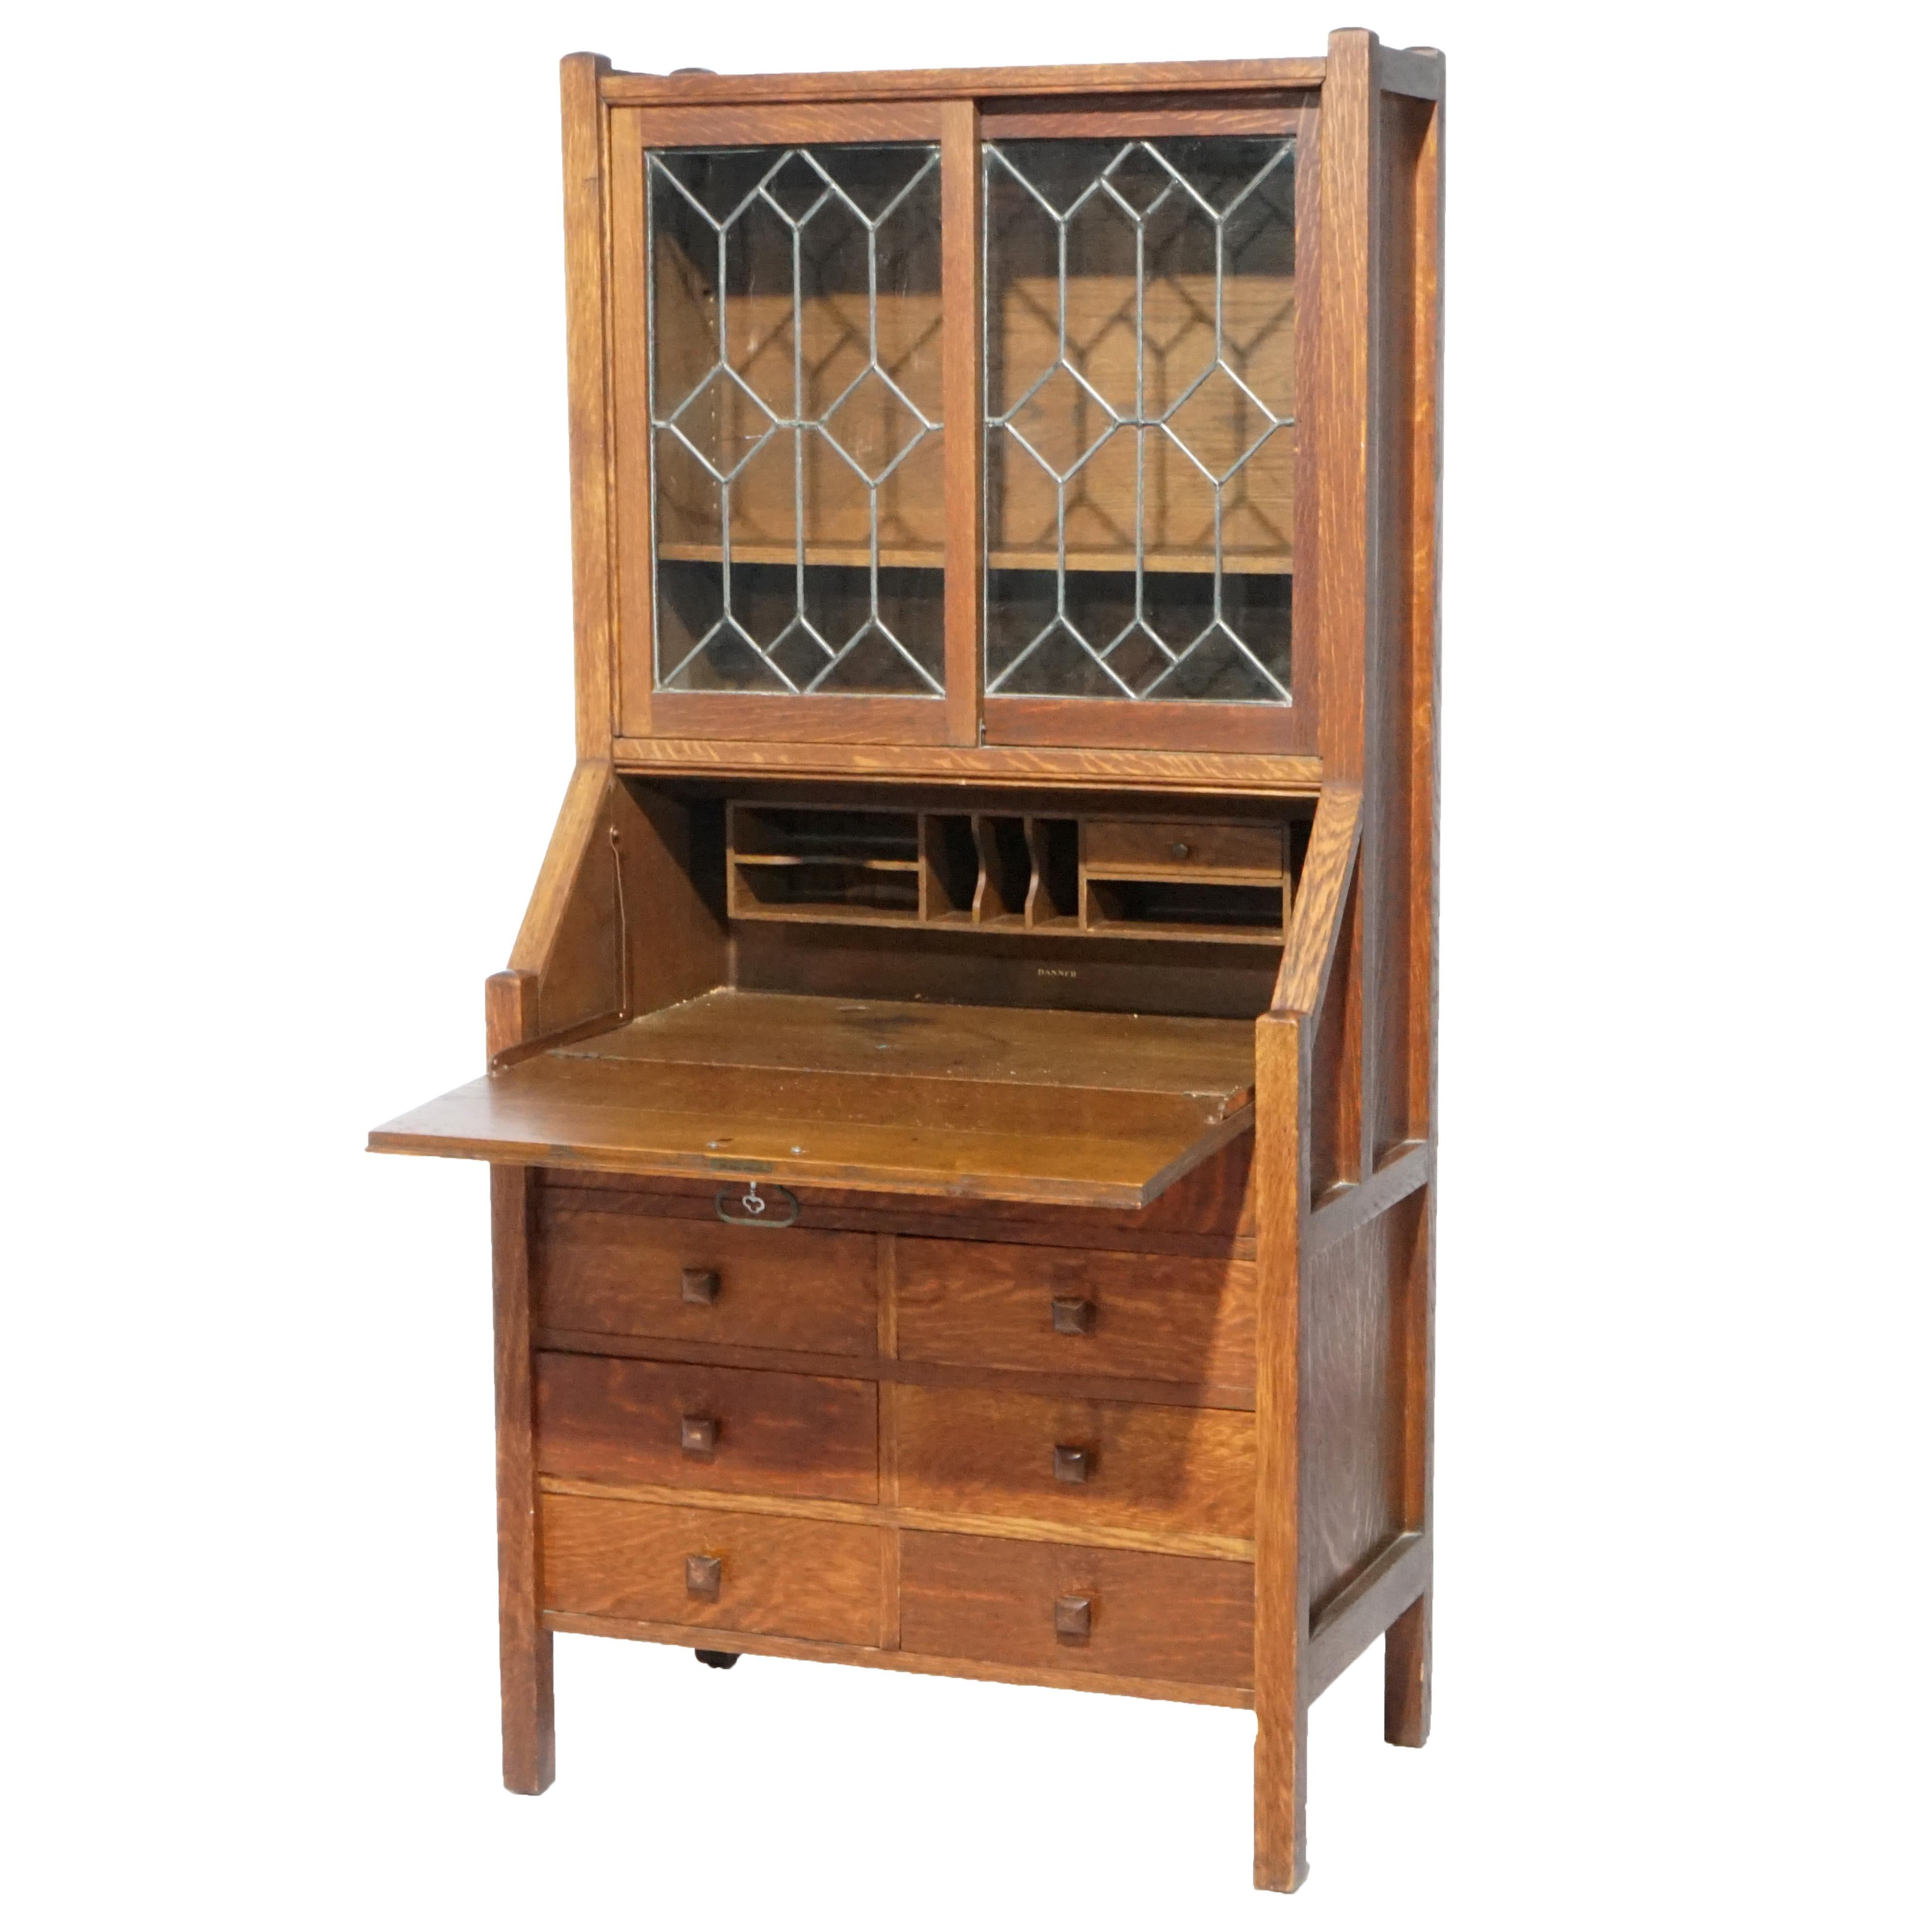 An antique Arts and Crafts Mission drop-front secretary offers quarter sawn oak construction with upper bookcase having double leaded glass doors opening to shelved interior over slant front desk and lower case having single long drawer over six